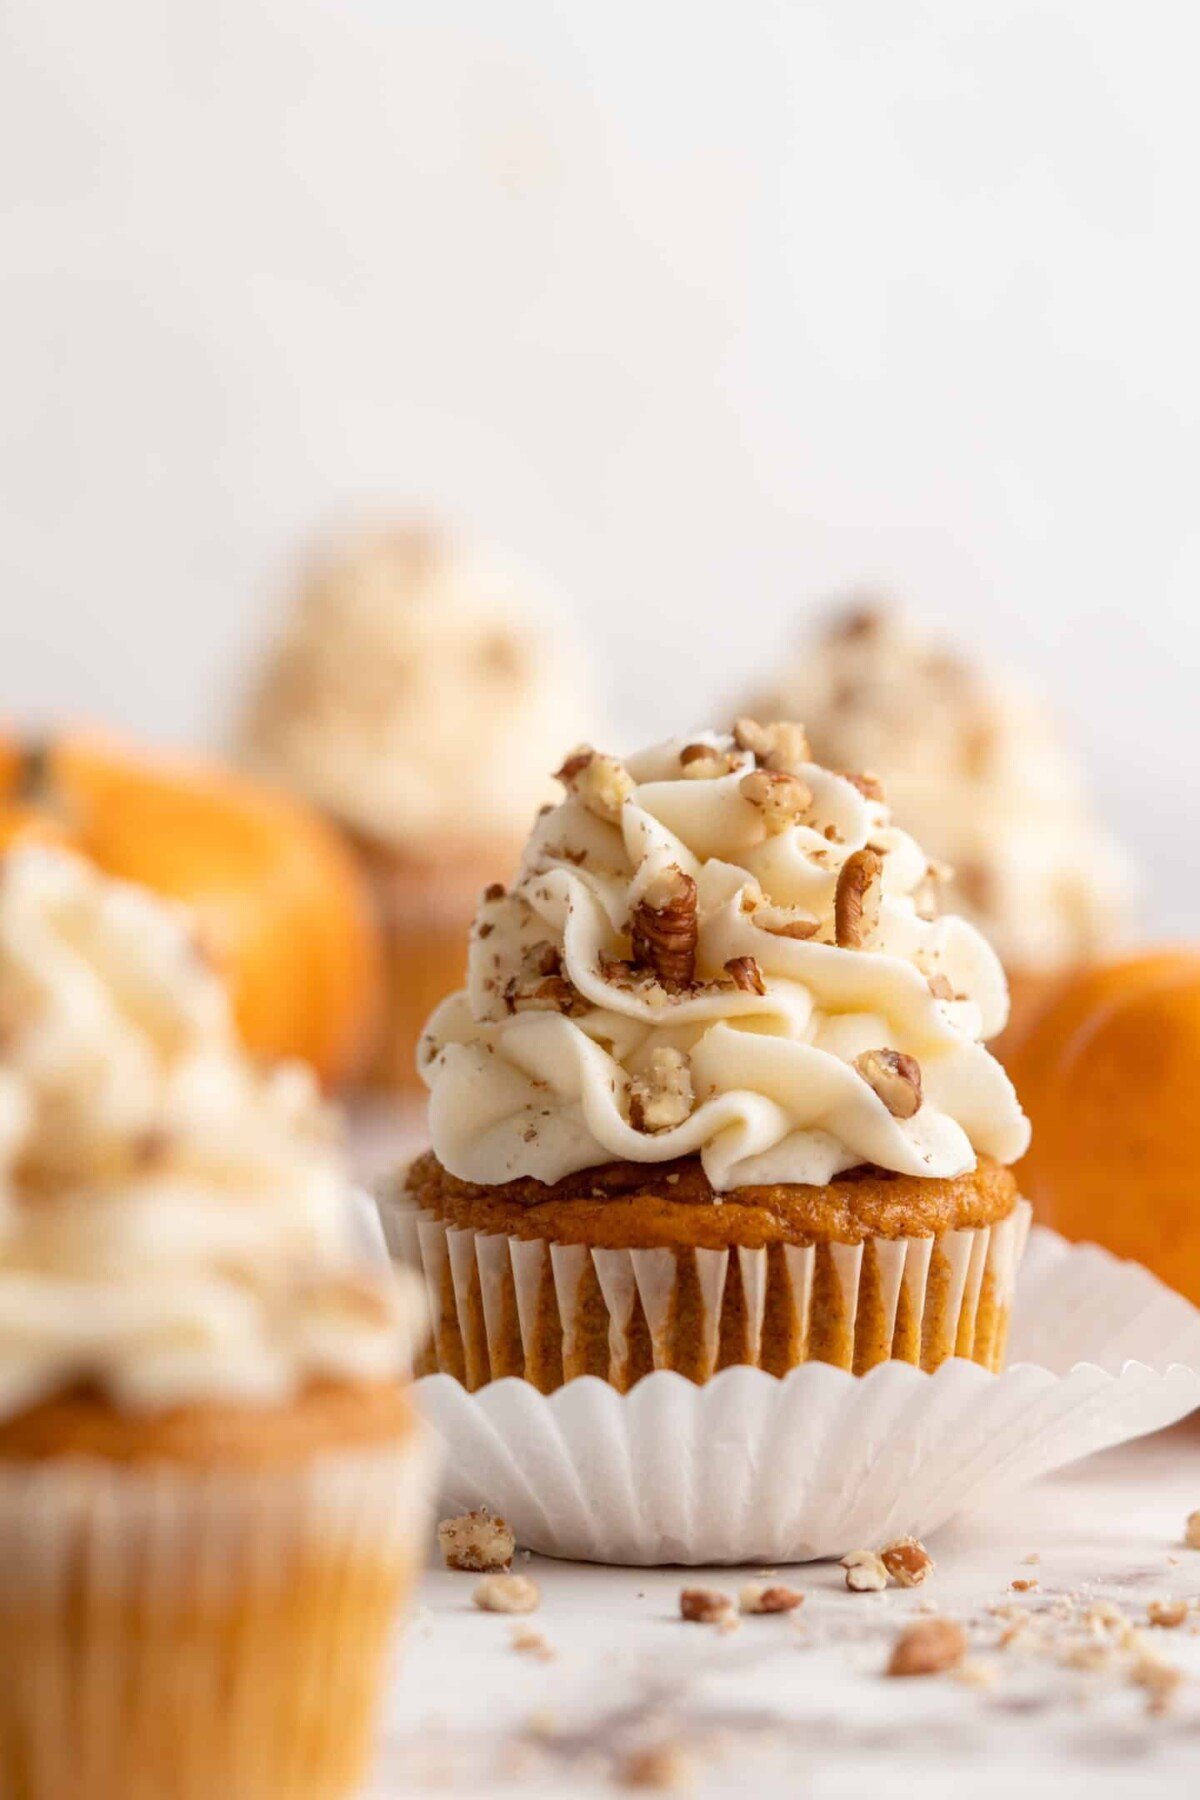 Close up of a pumpkin cupcake topped with cream cheese frosting and pecans, with more cupcakes and pumpkins in the background, and a cupcake in the foreground.